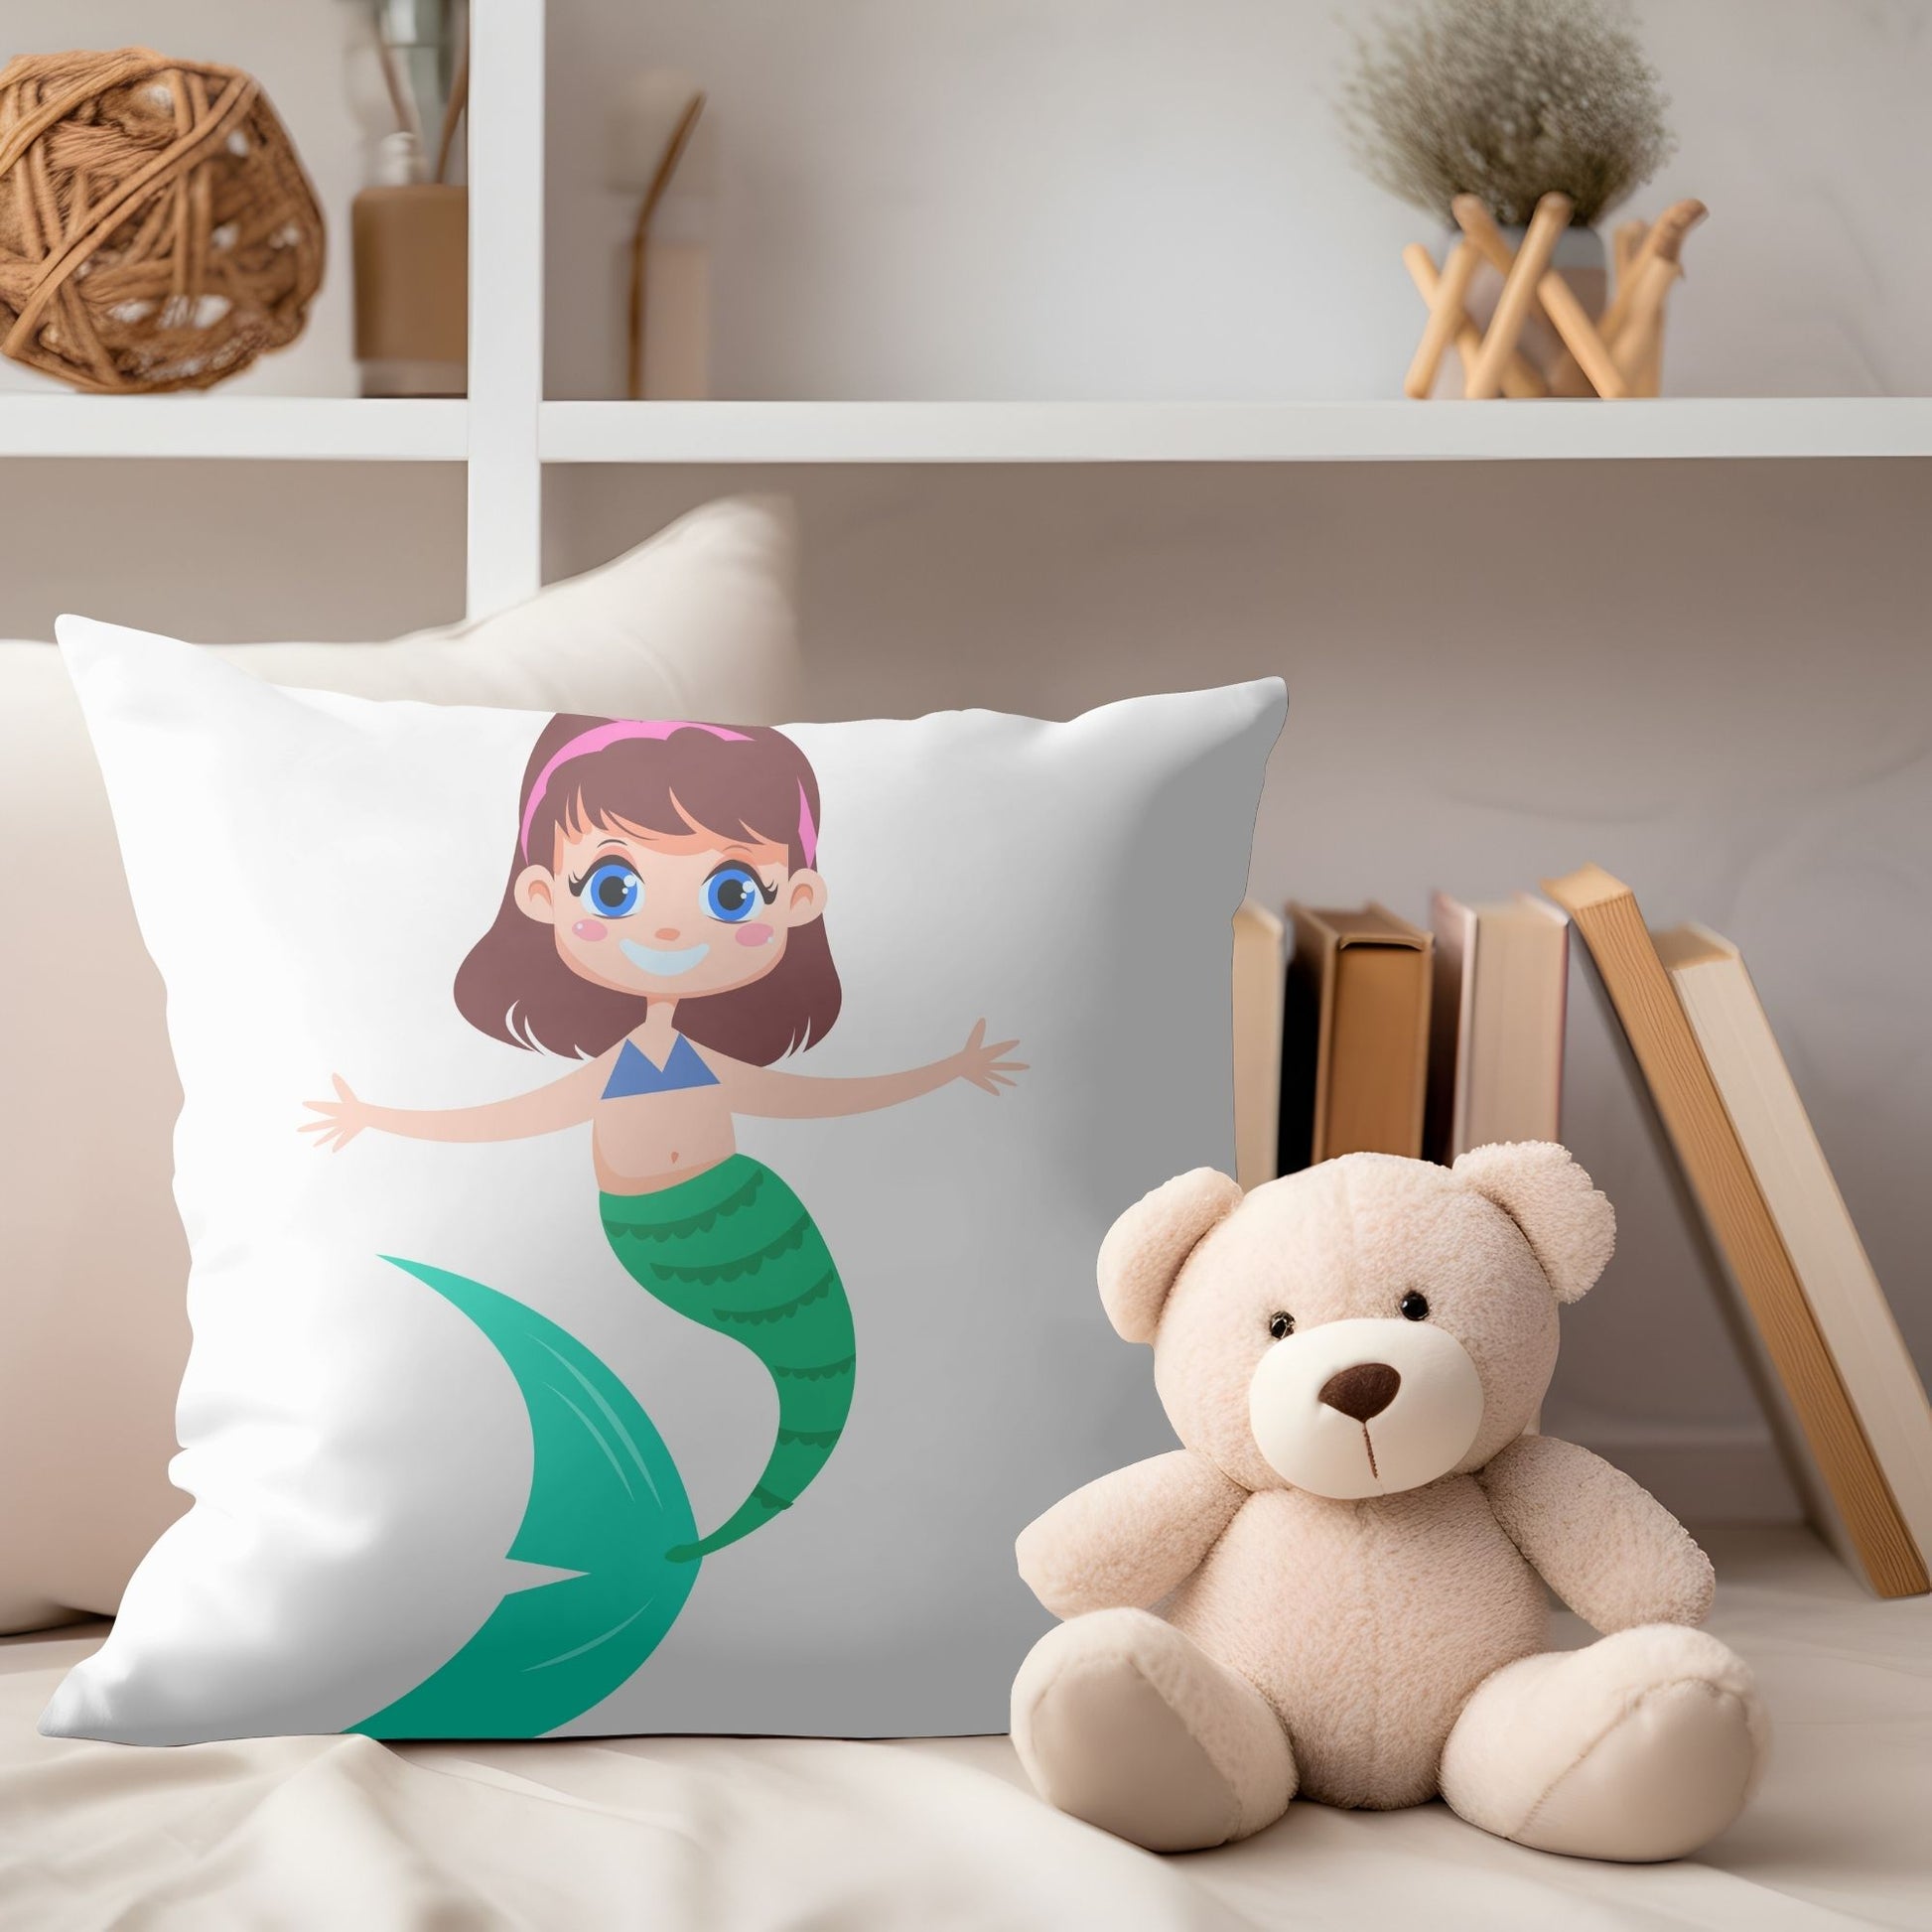 Whimsical mermaid girl decorative pillow for kids' rooms.